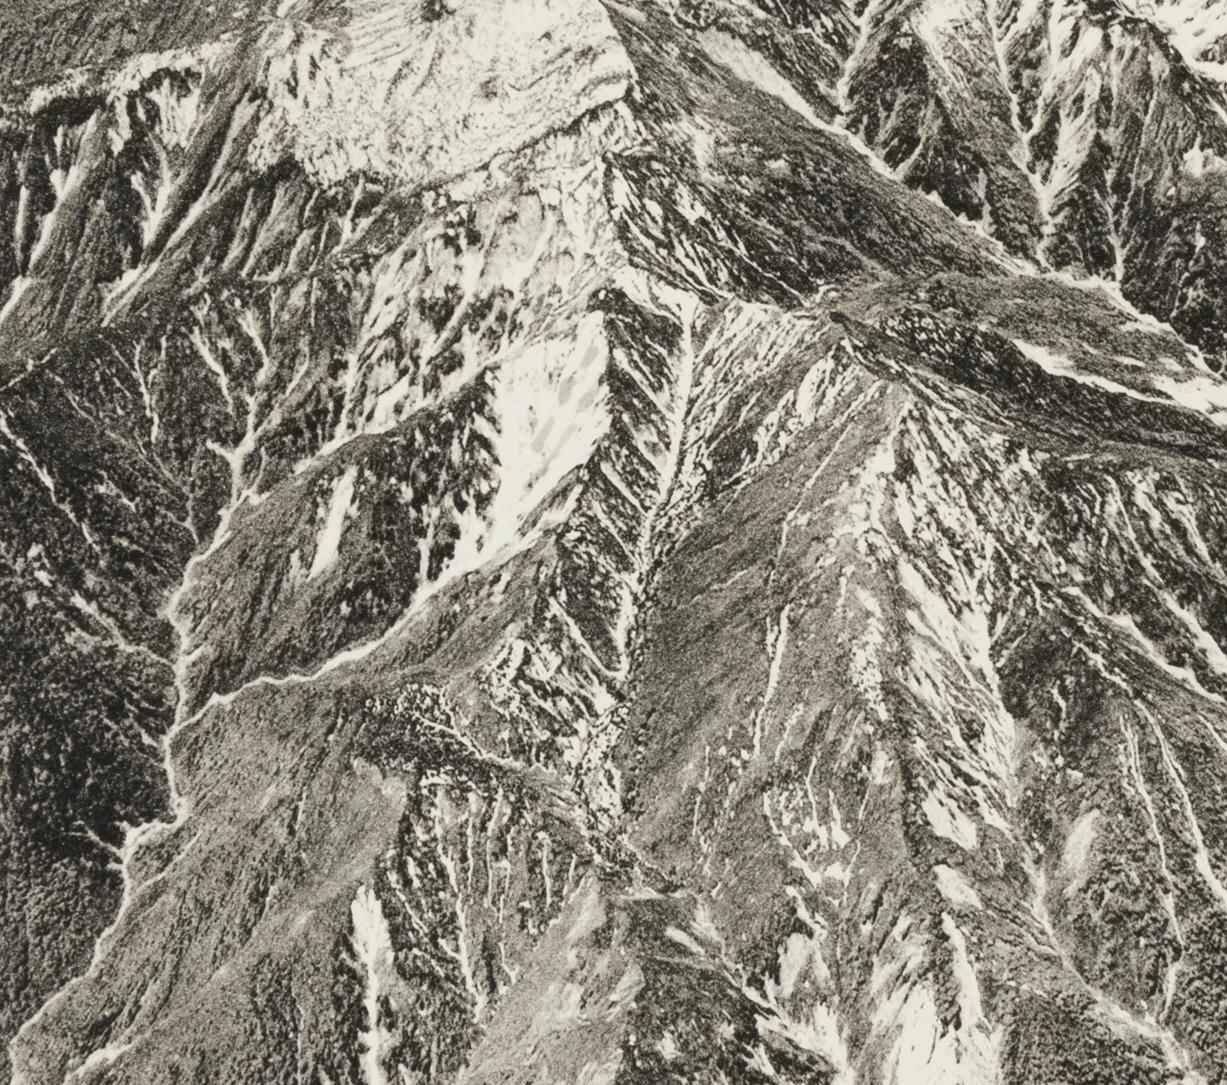 Beth Ganz, 'Mount Haru, Japan', copperplate photogravure etching, edition 10, 2019. Signed, titled, and numbered 6/10 in pencil. A superb, richly-inked impression in warm black ink, on cream, wove, cotton rag paper; the full sheet in excellent